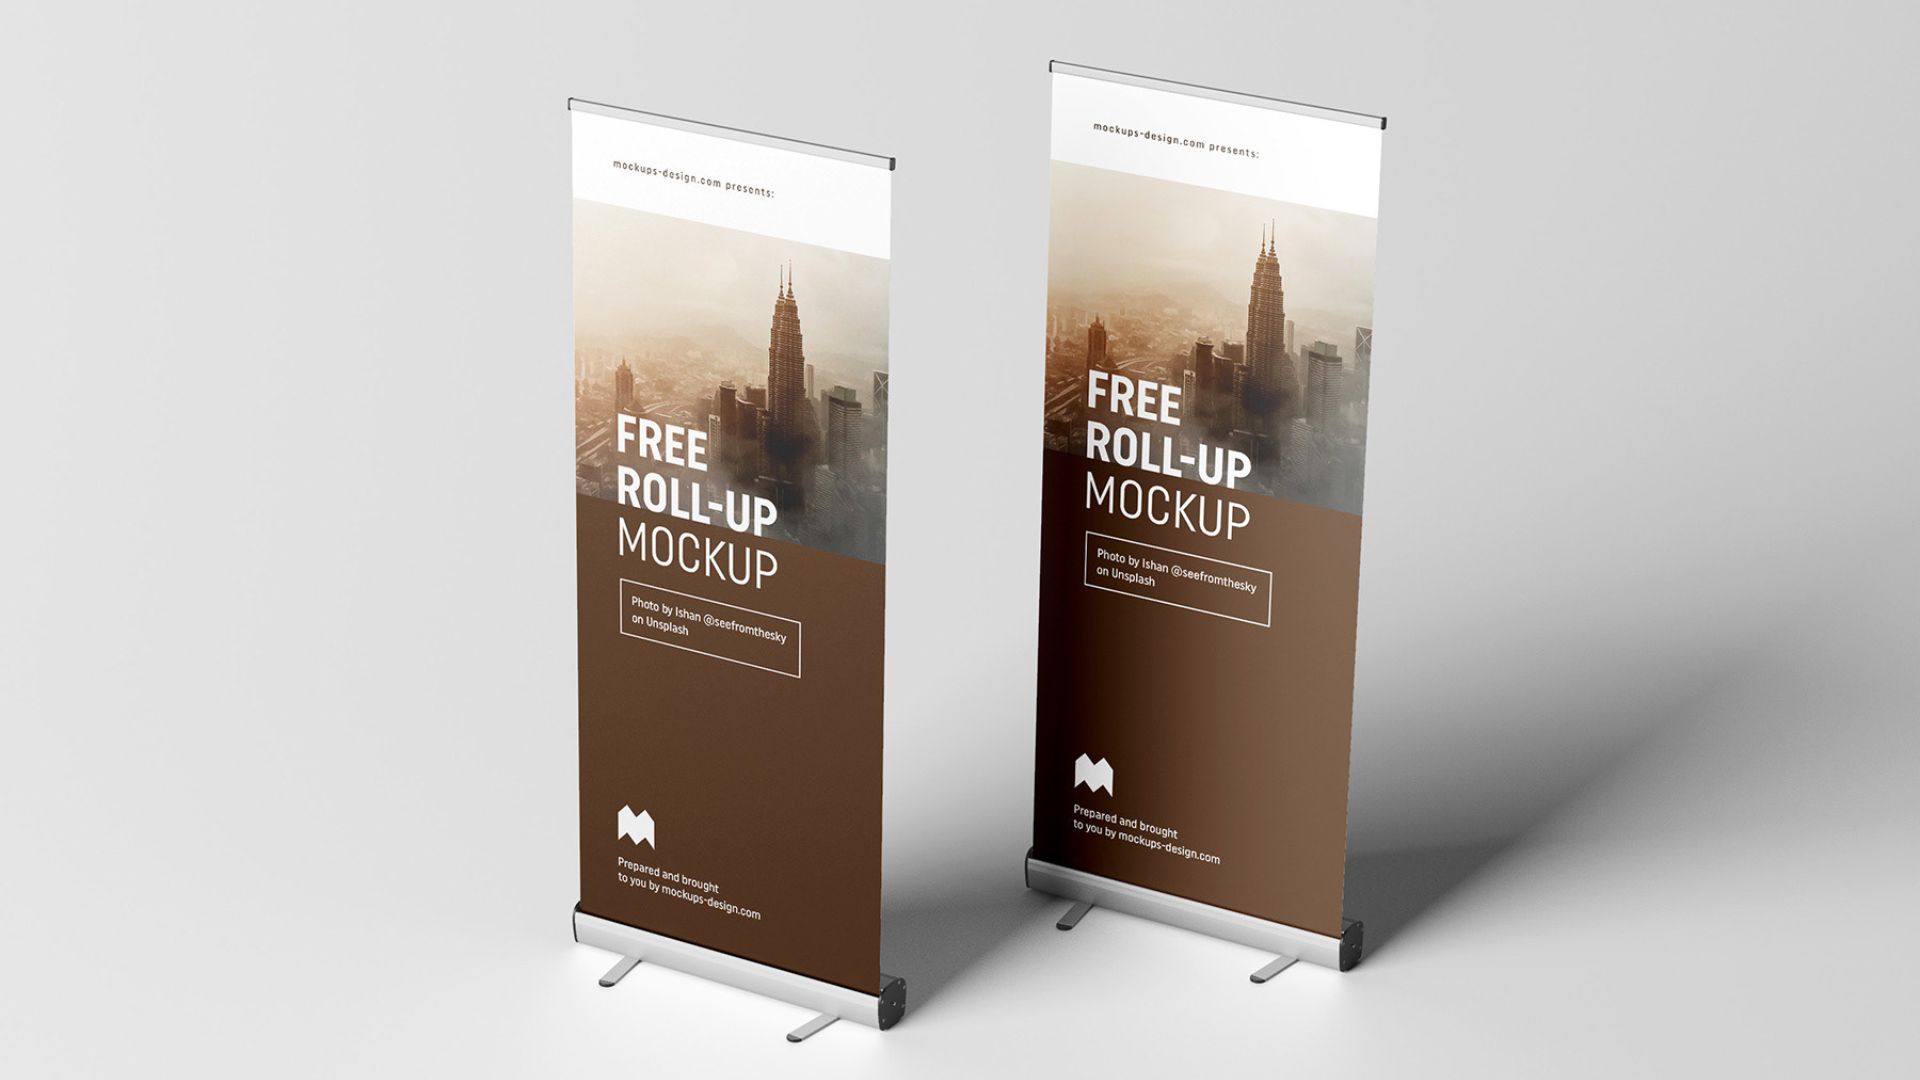 What Makes Roll Up Banners Ideal for Mobile Marketing